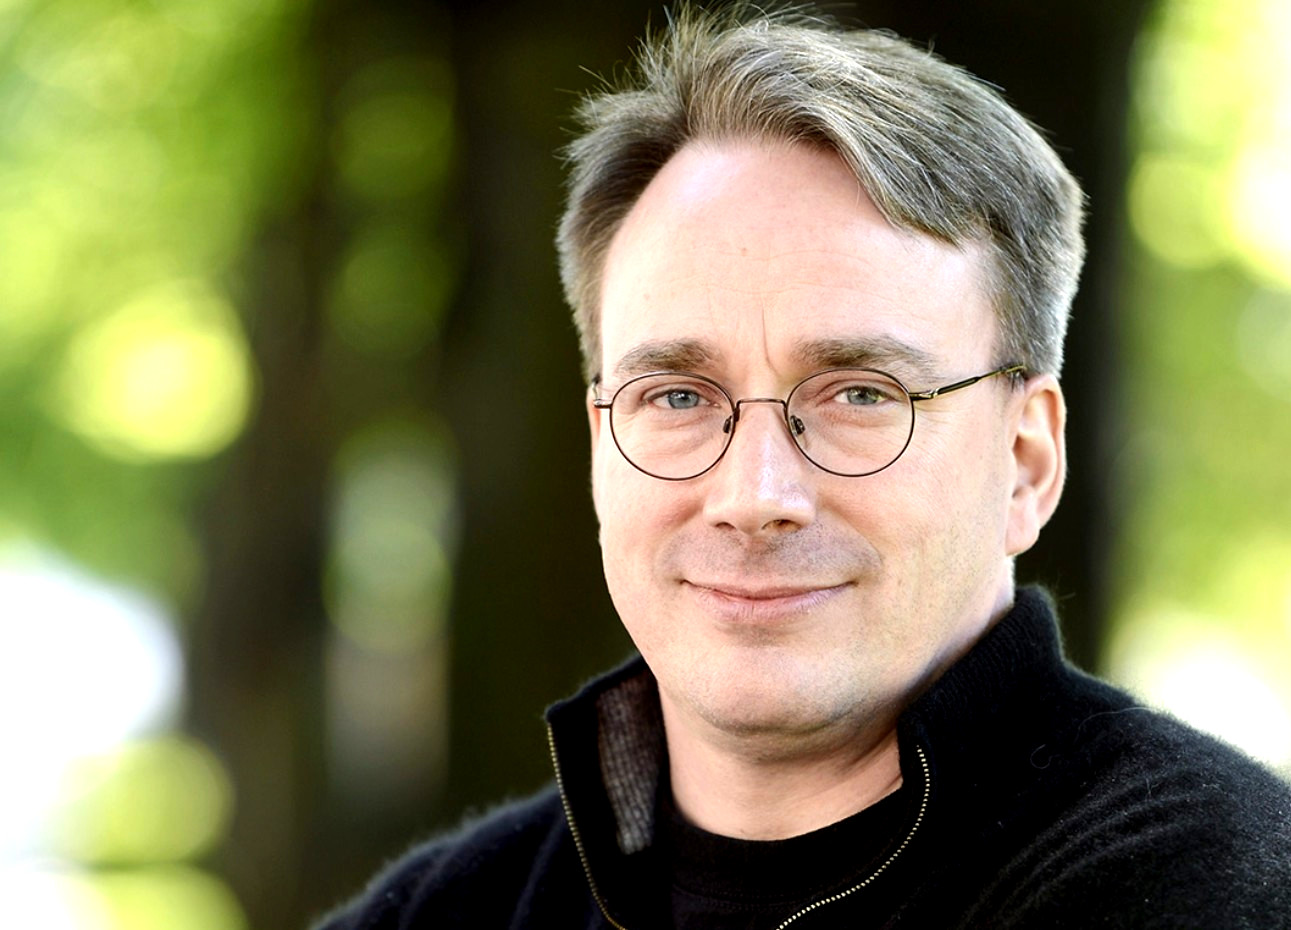 Linus Torvalds criticized the L1 cache reset function when context switching – Linus all programming languages suck except C – kernel got names